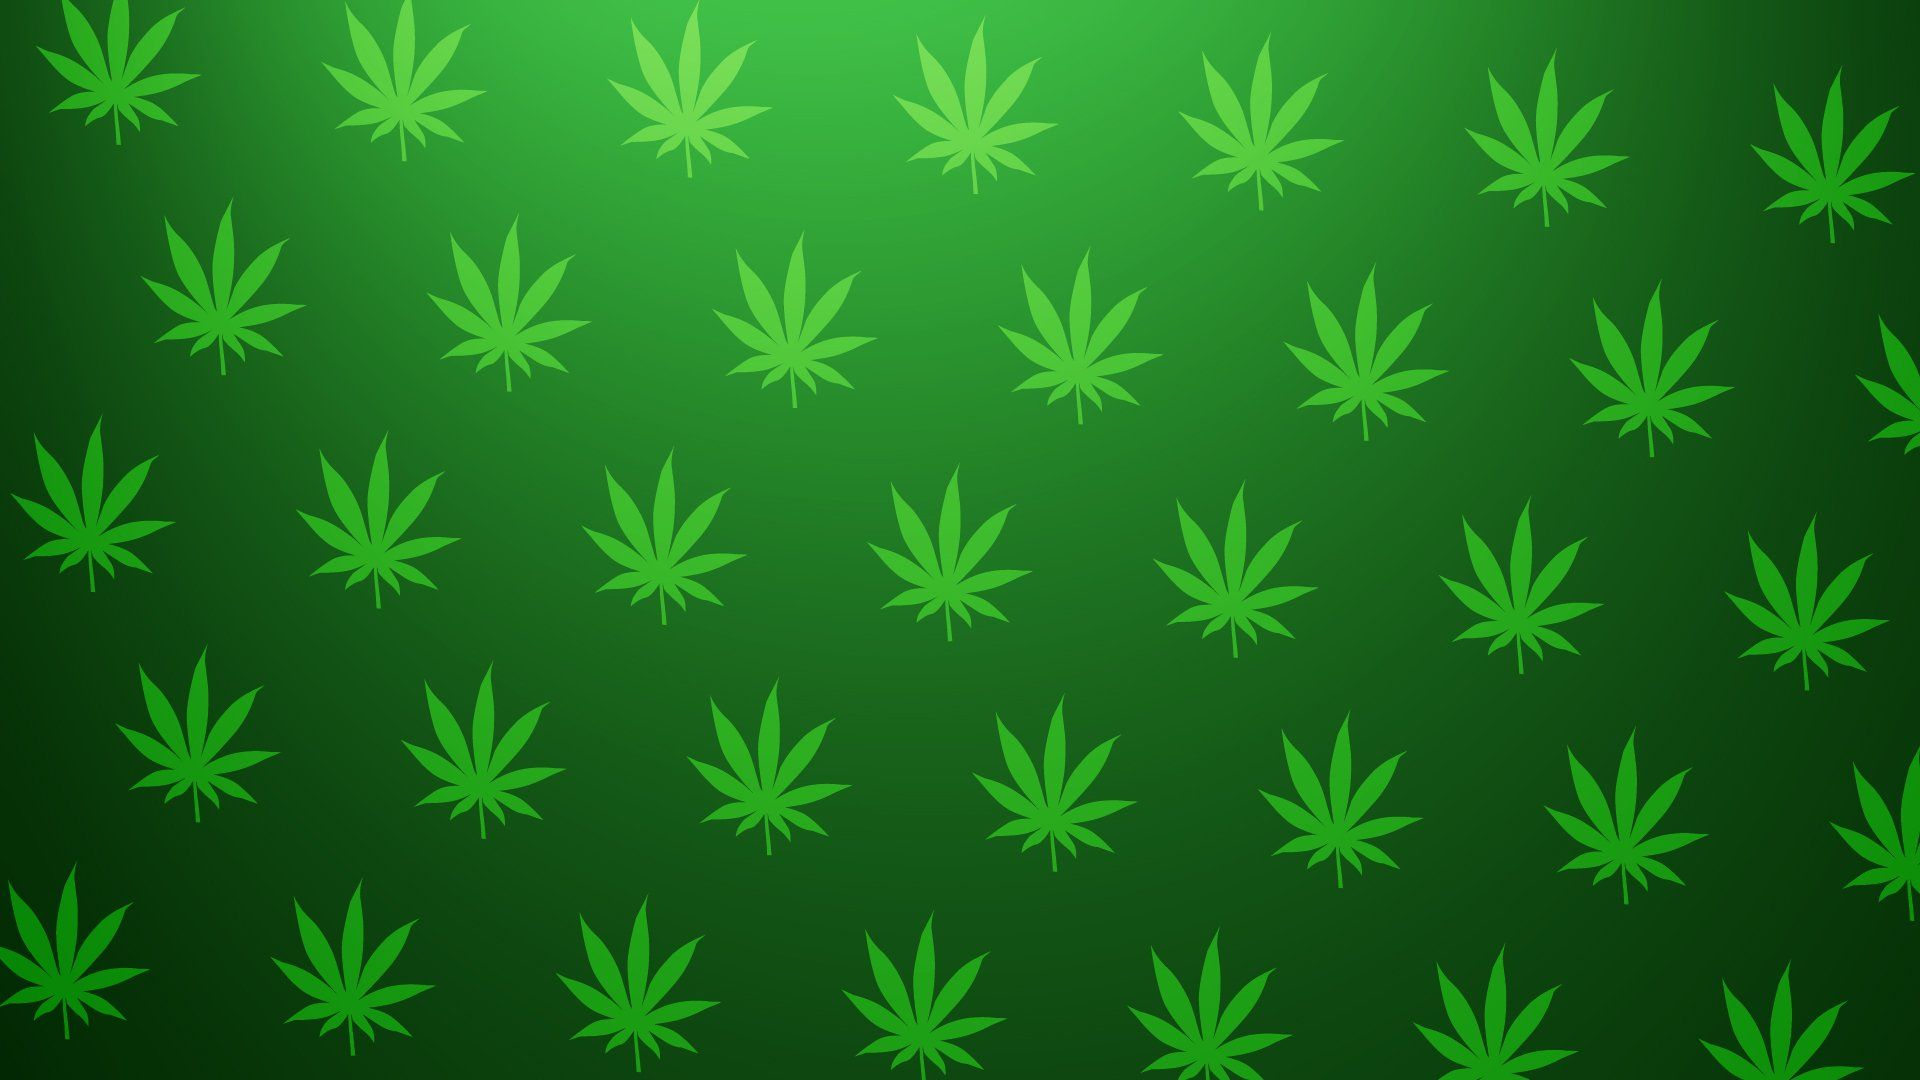 abstract weed wallpaper